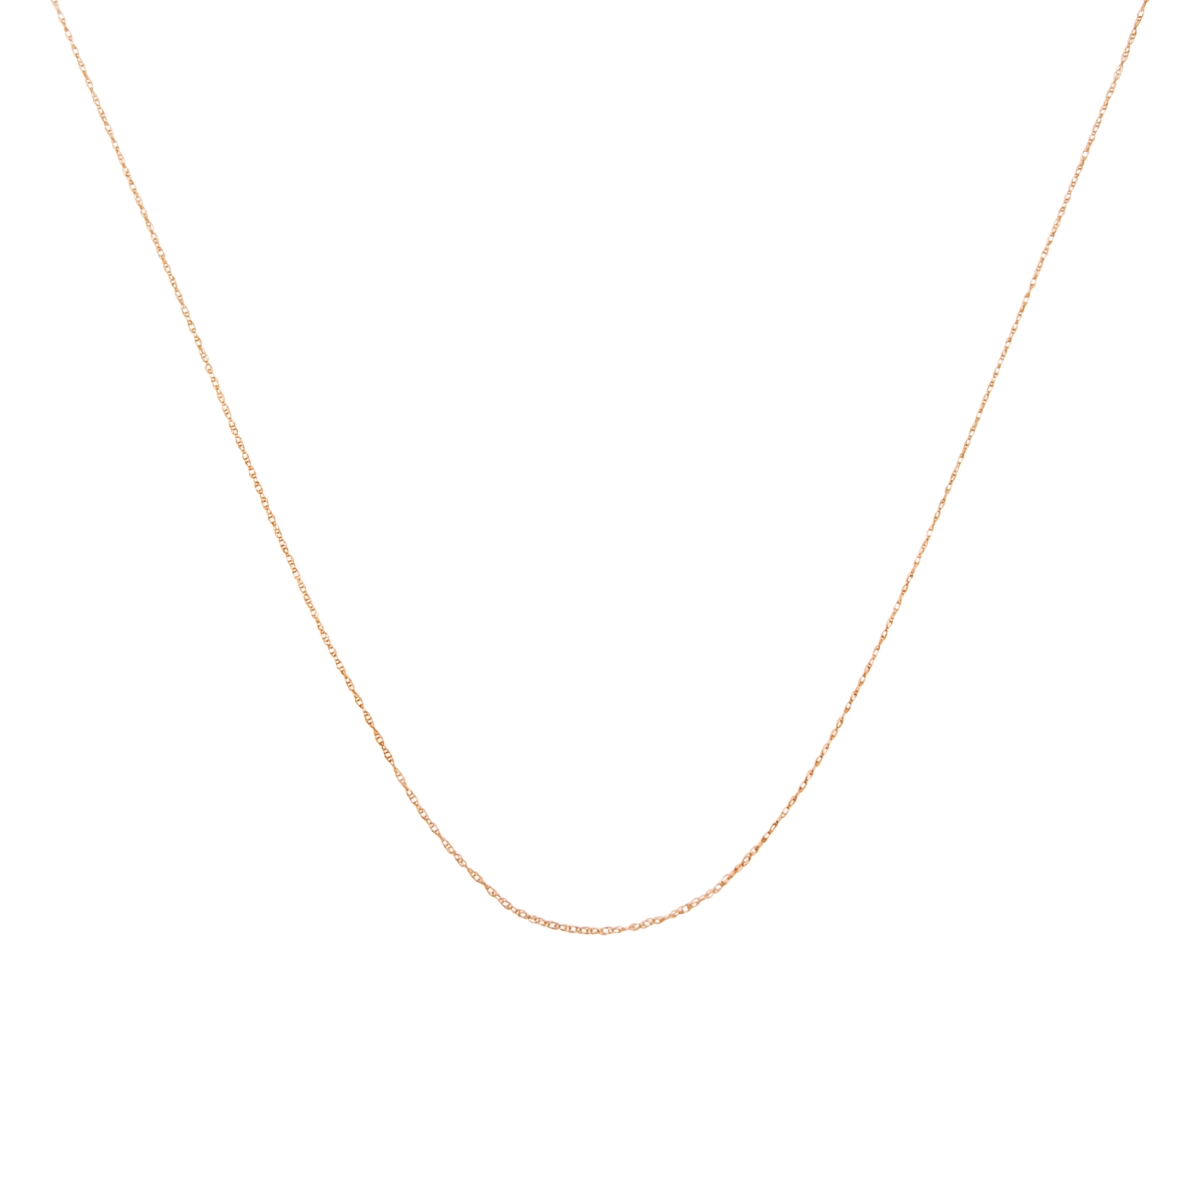 Picture of Infinite Jewels 018048C5RC Solid 10K Rose Gold 0.5 mm Rope Chain Necklace for Unisex Chain - Size 16 in.